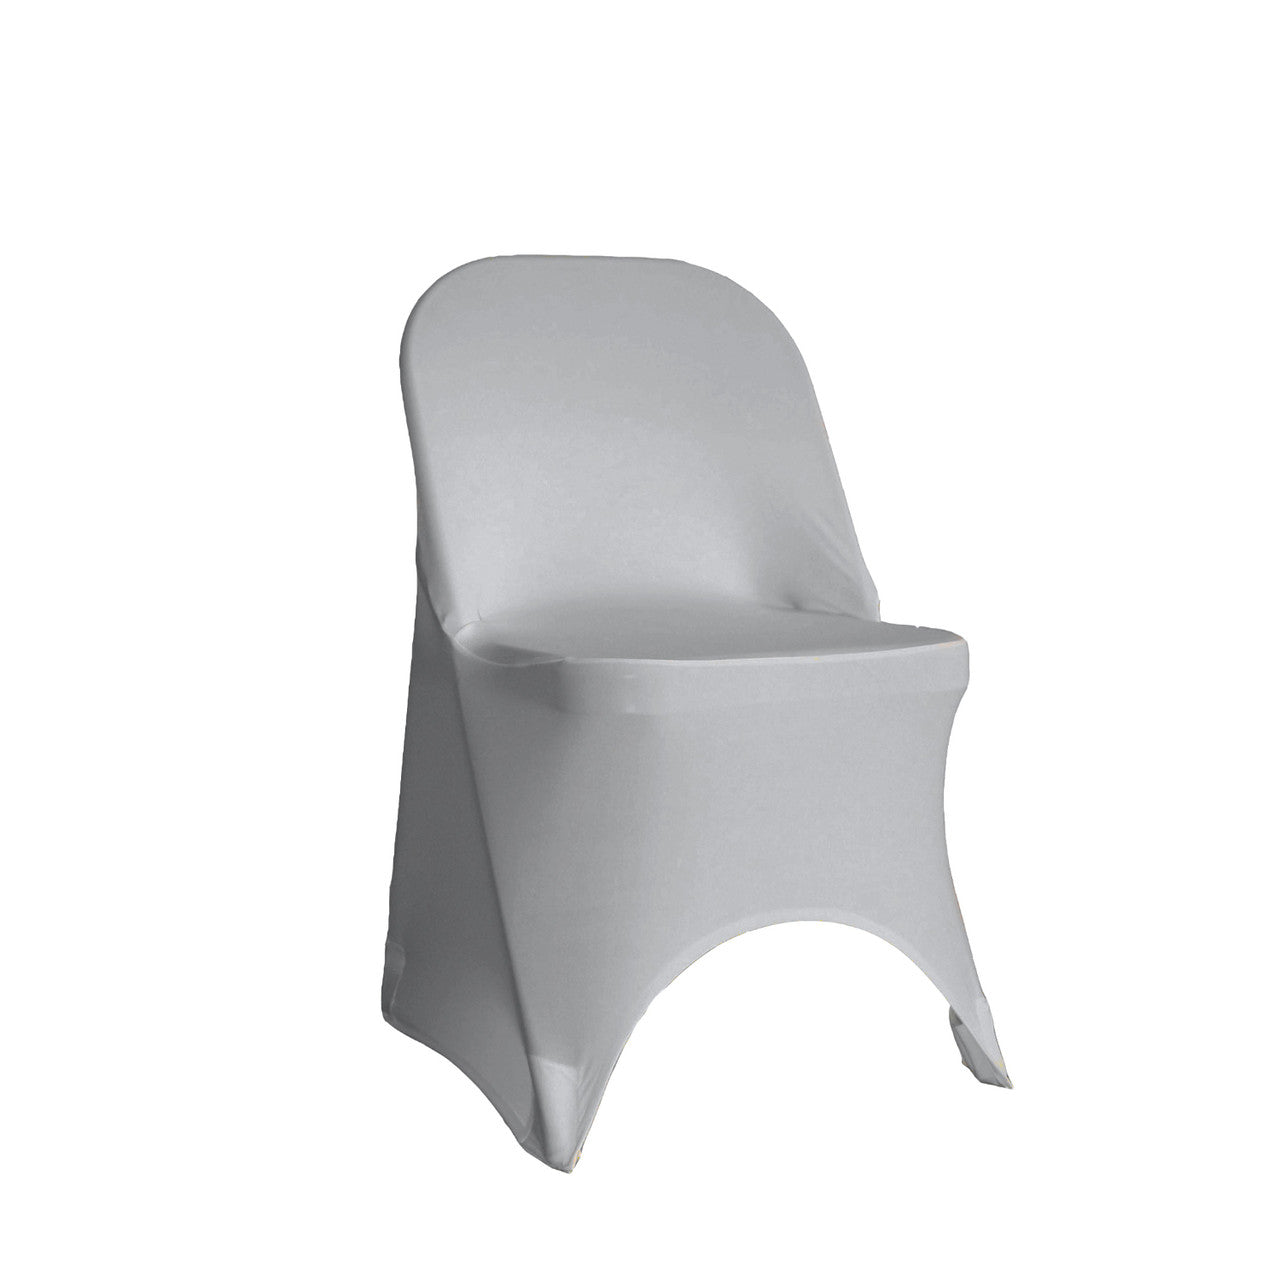 Print Spandex Folding Chair Cover in White with Silver Marbling – Urquid  Linen